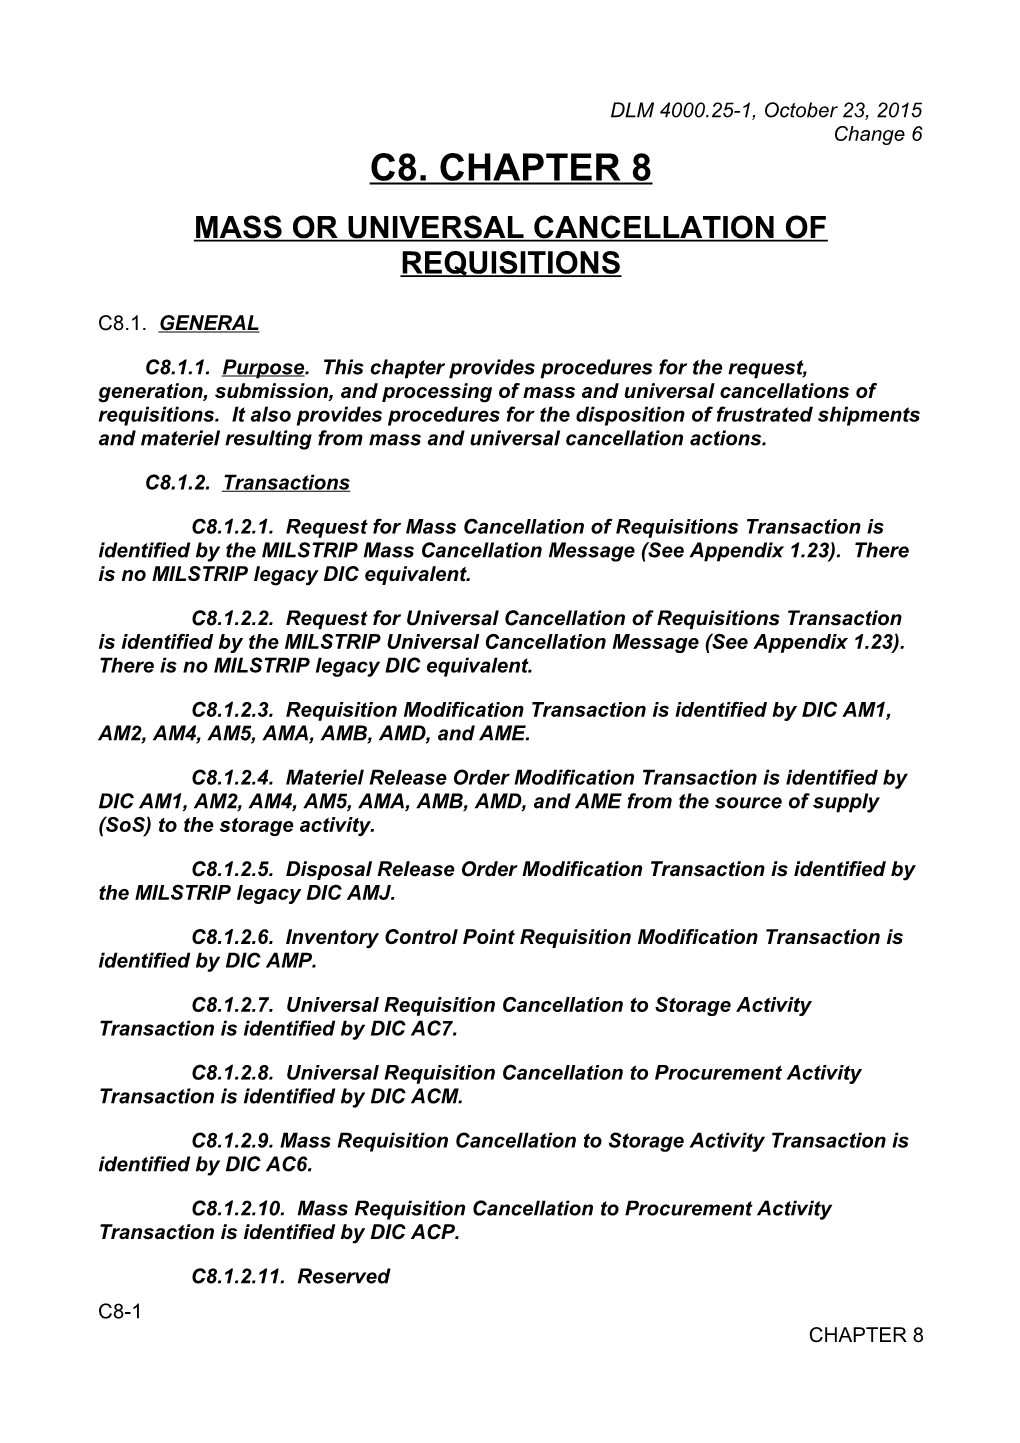 Chapter 8 - Mass Or Universal Cancellation of Requisitions